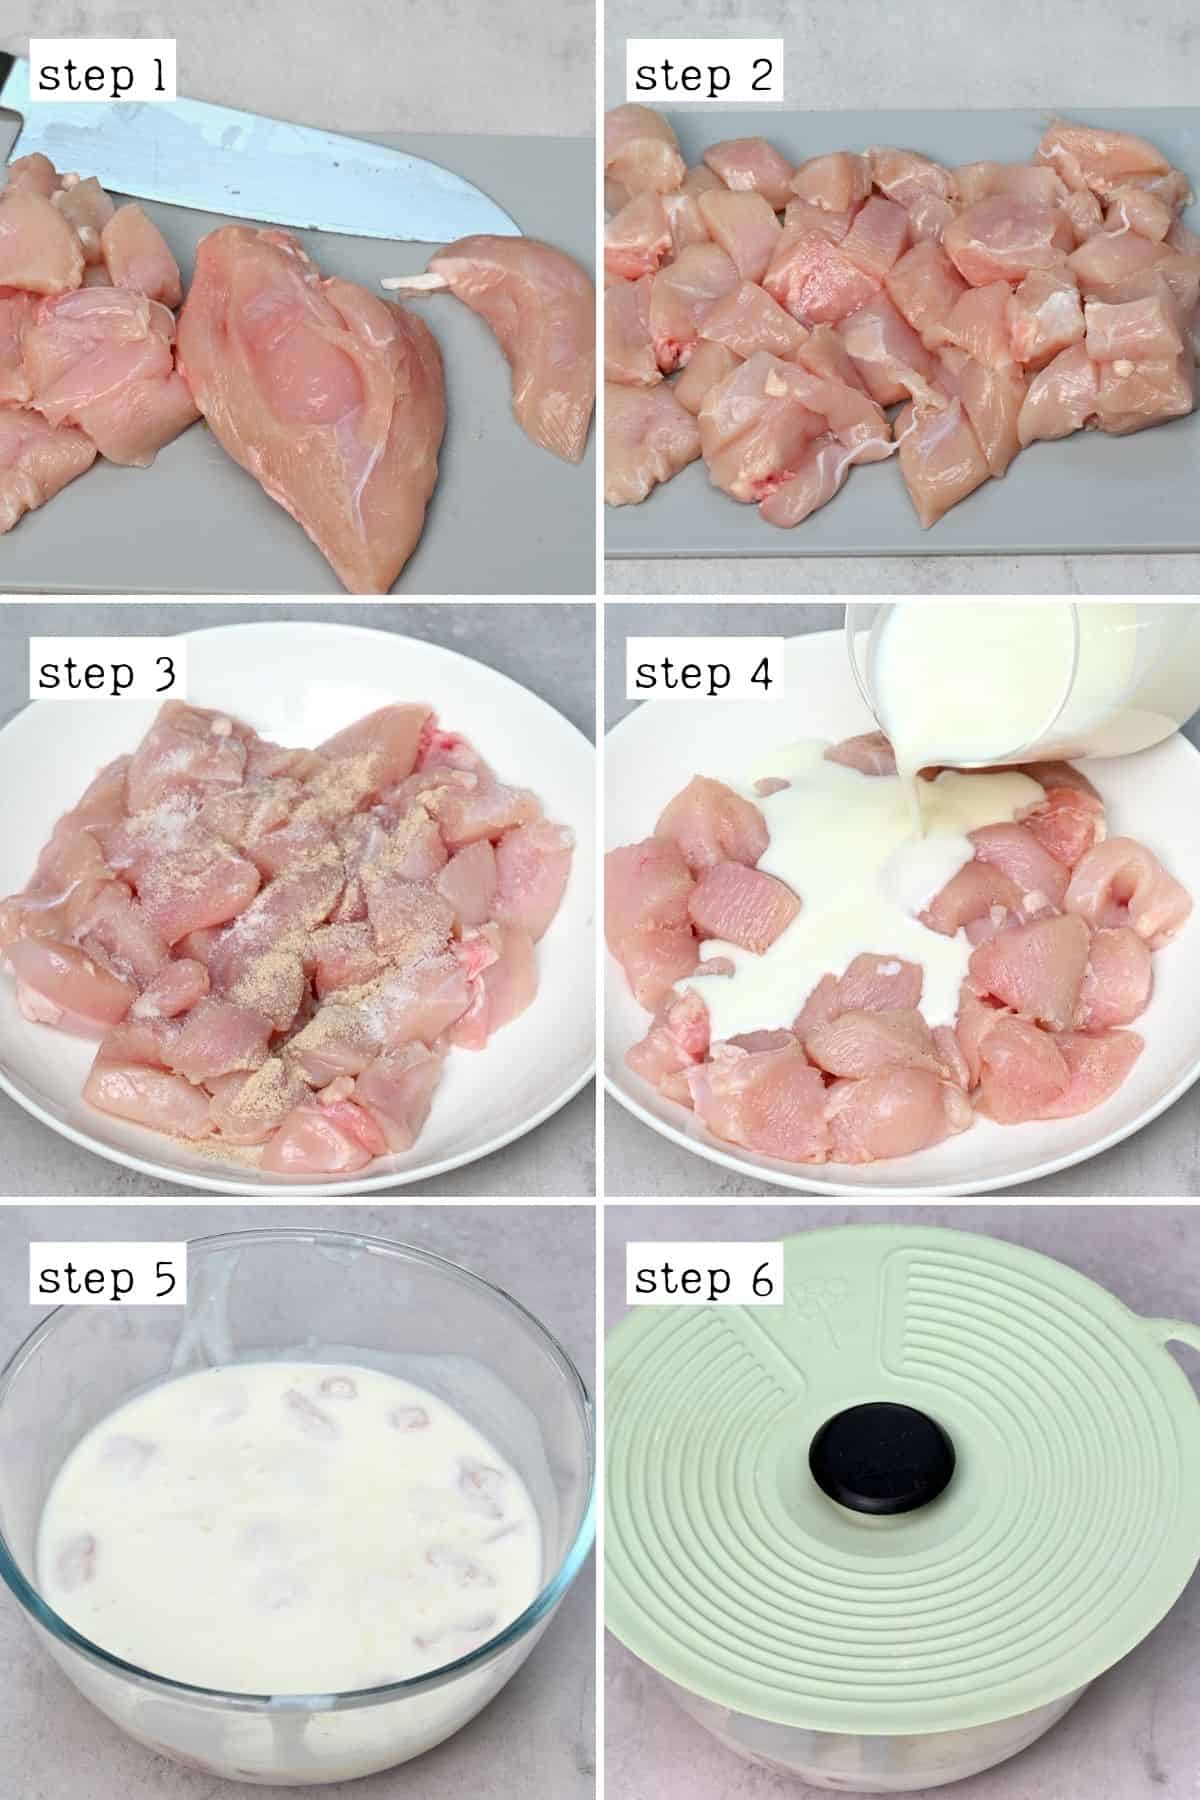 Steps for marinating chicken with buttermilk